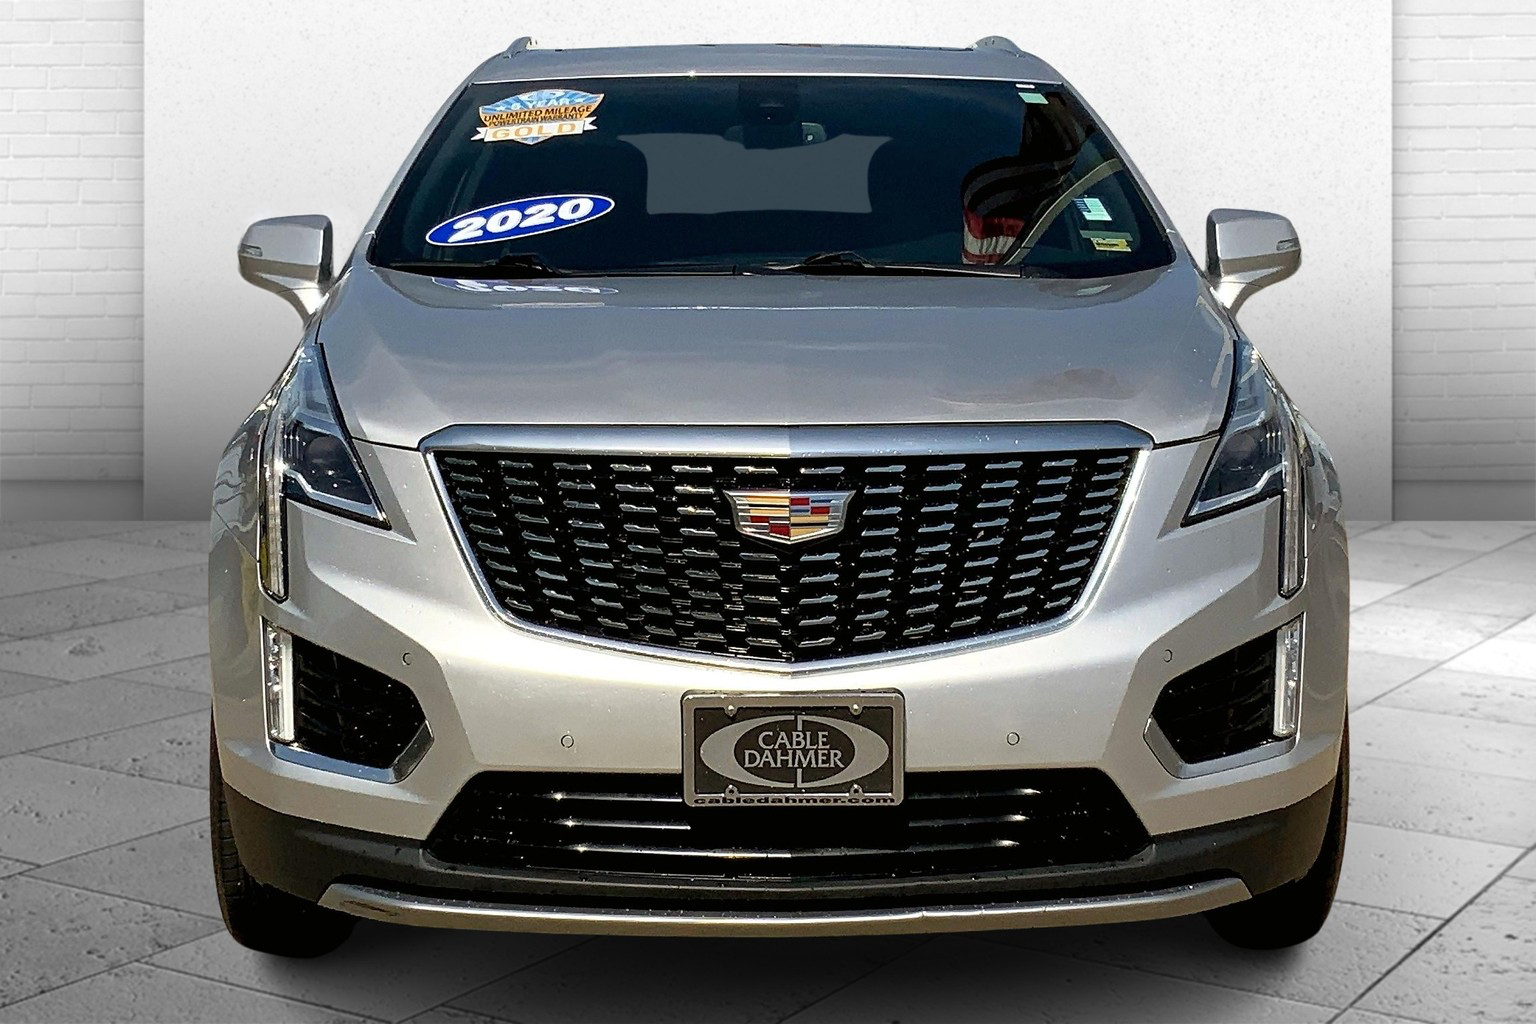 Used Silver 2020 Cadillac XT5 in KANSAS CITY: Suv for Sale - CT1765